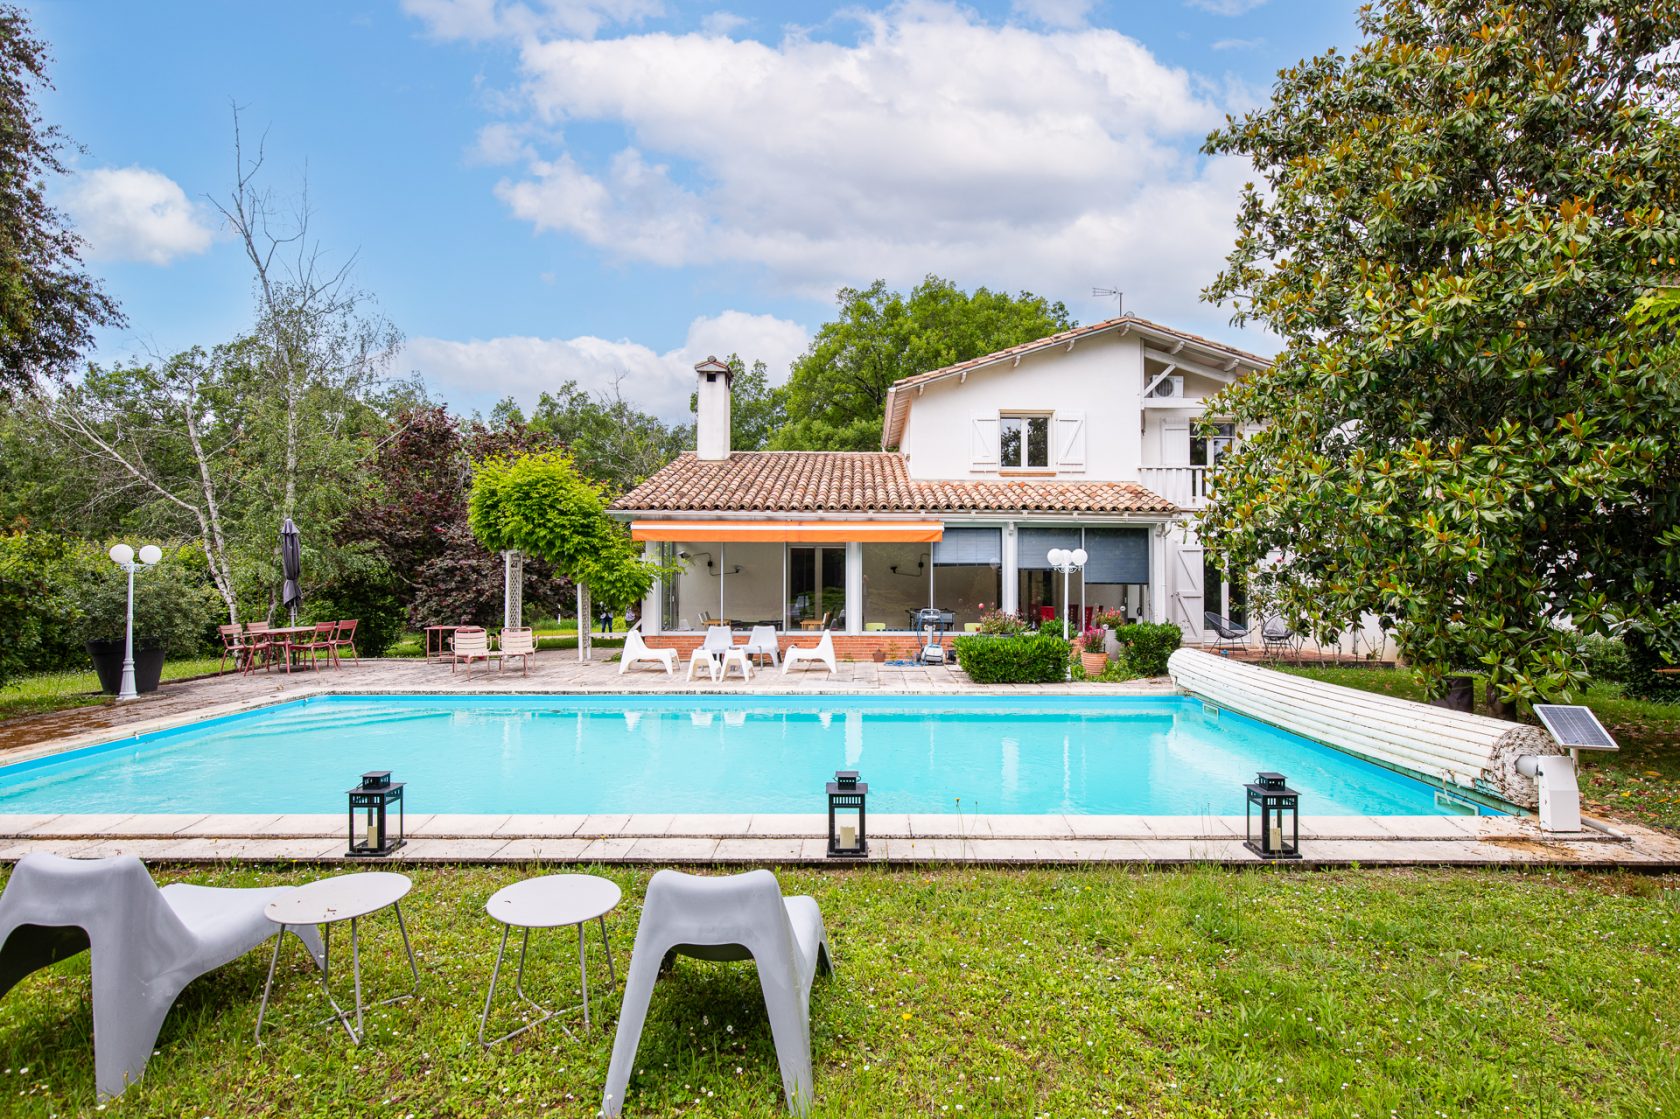 House with swimming pool in the heart of a park 5 minutes from the center